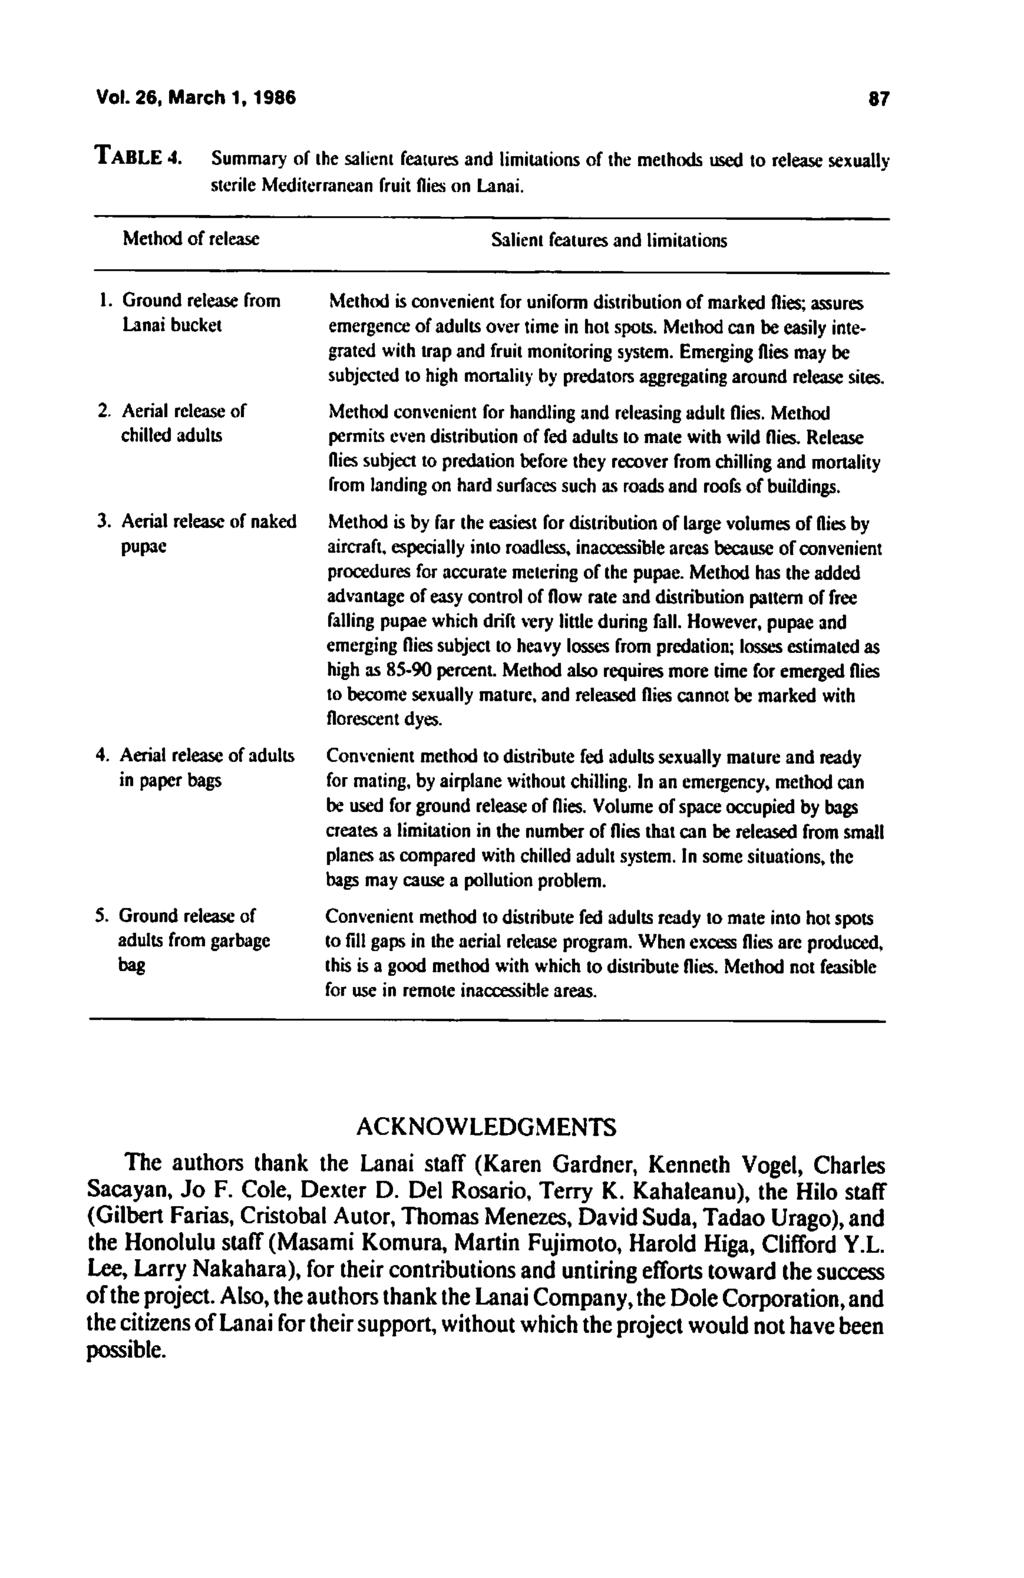 Vol. 26, March 1,1986 87 TABLE 4. Summary of the salient features and limitations of the methods used to release sexually sterile Mediterranean fruit flies on Lanai.